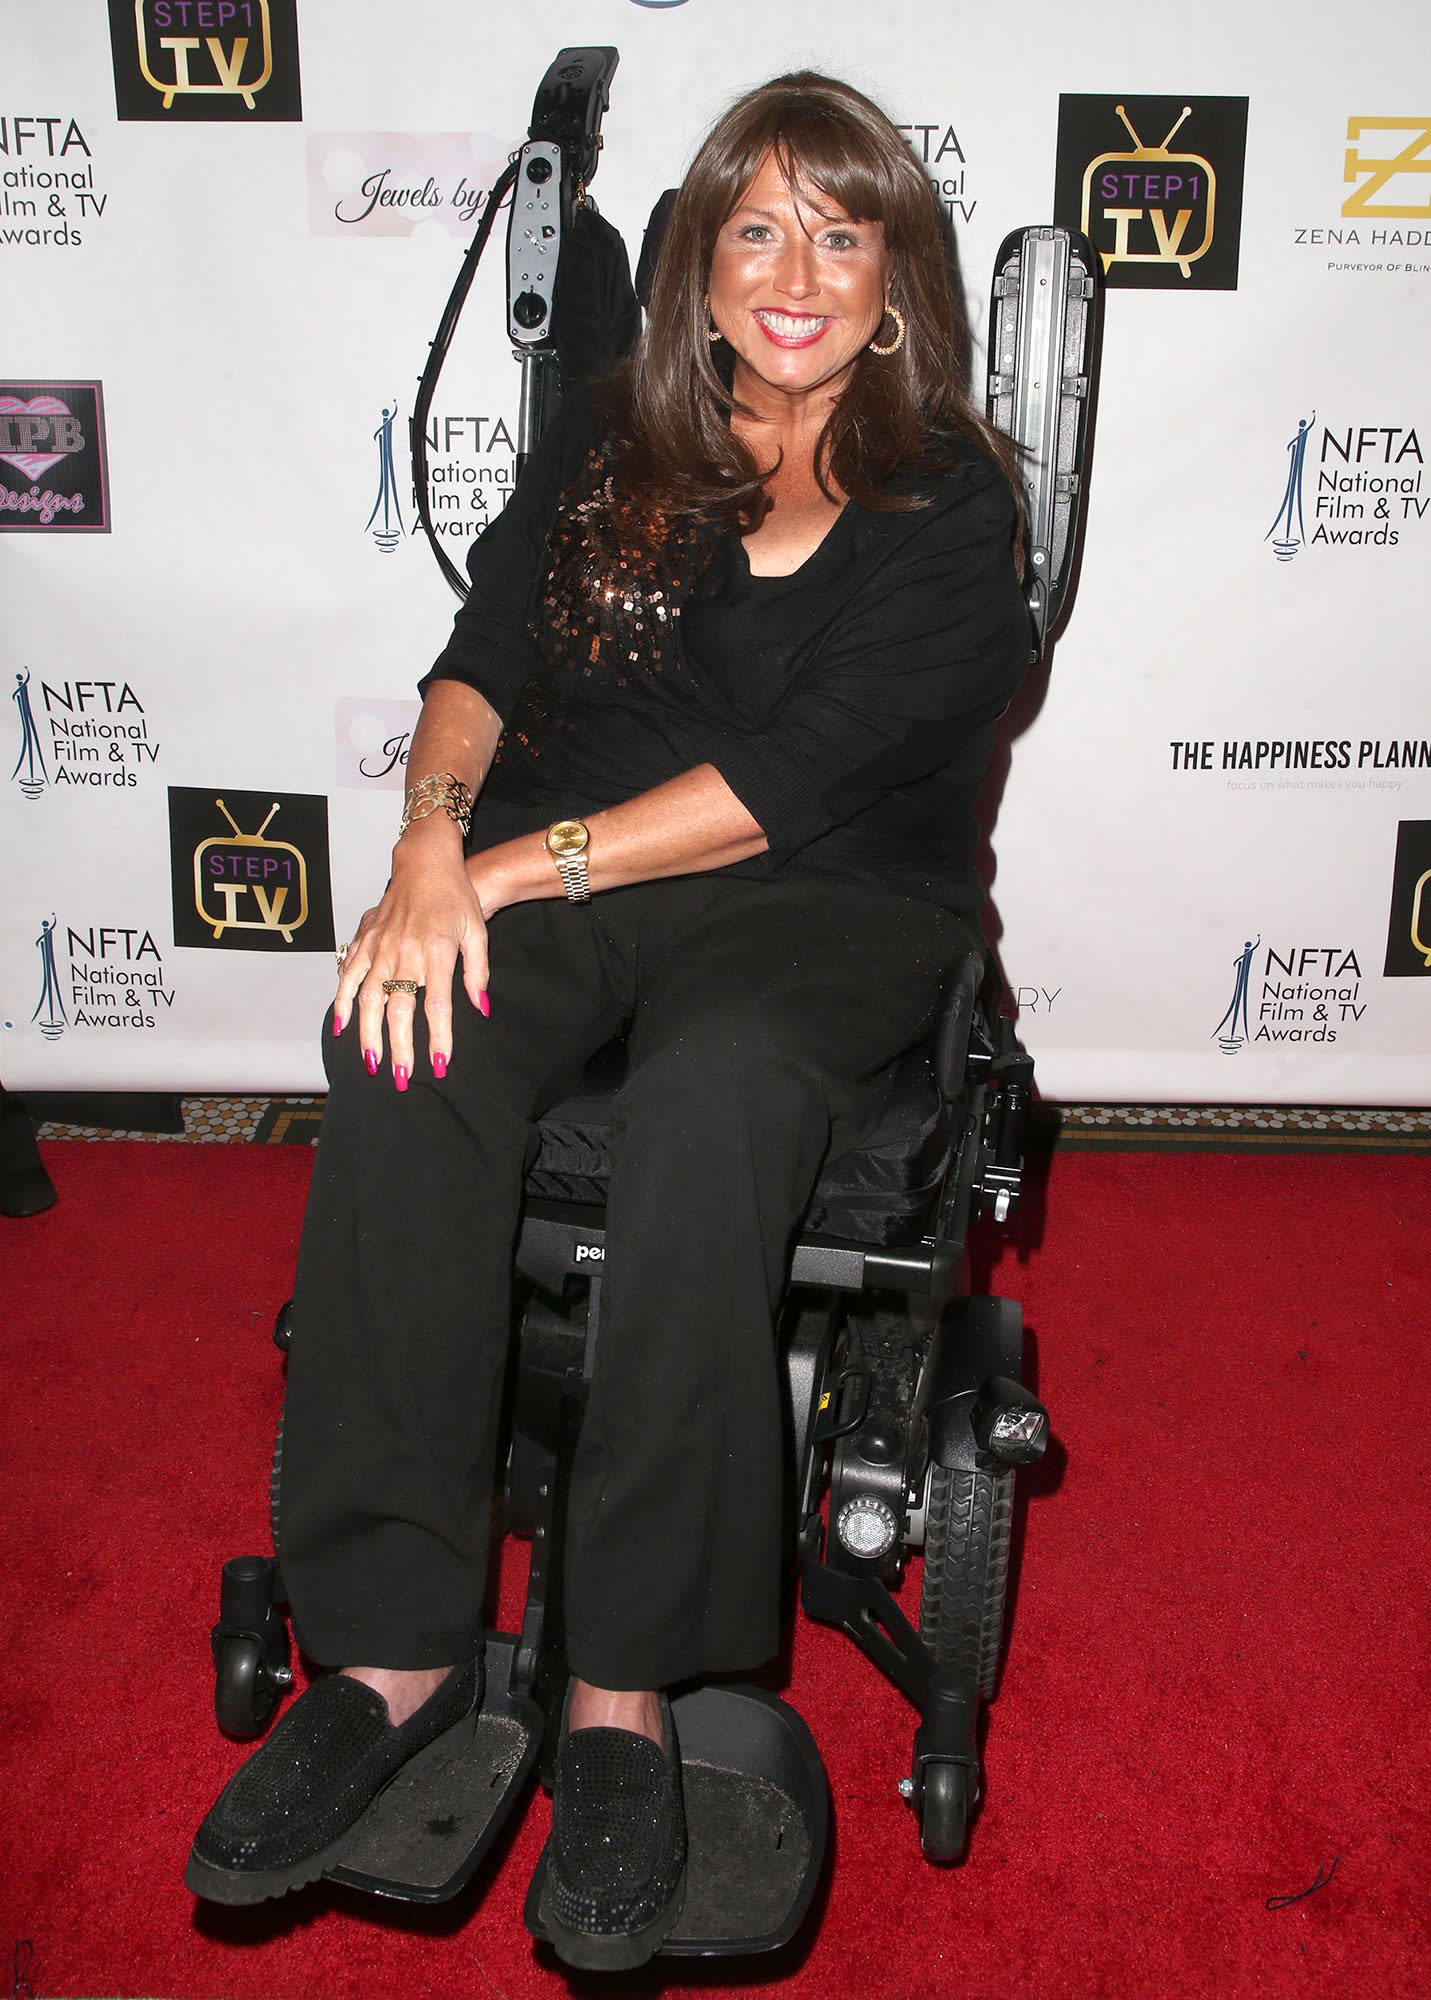 Abby Lee Miller Dances Again While ReLearning to Walk as She Continues